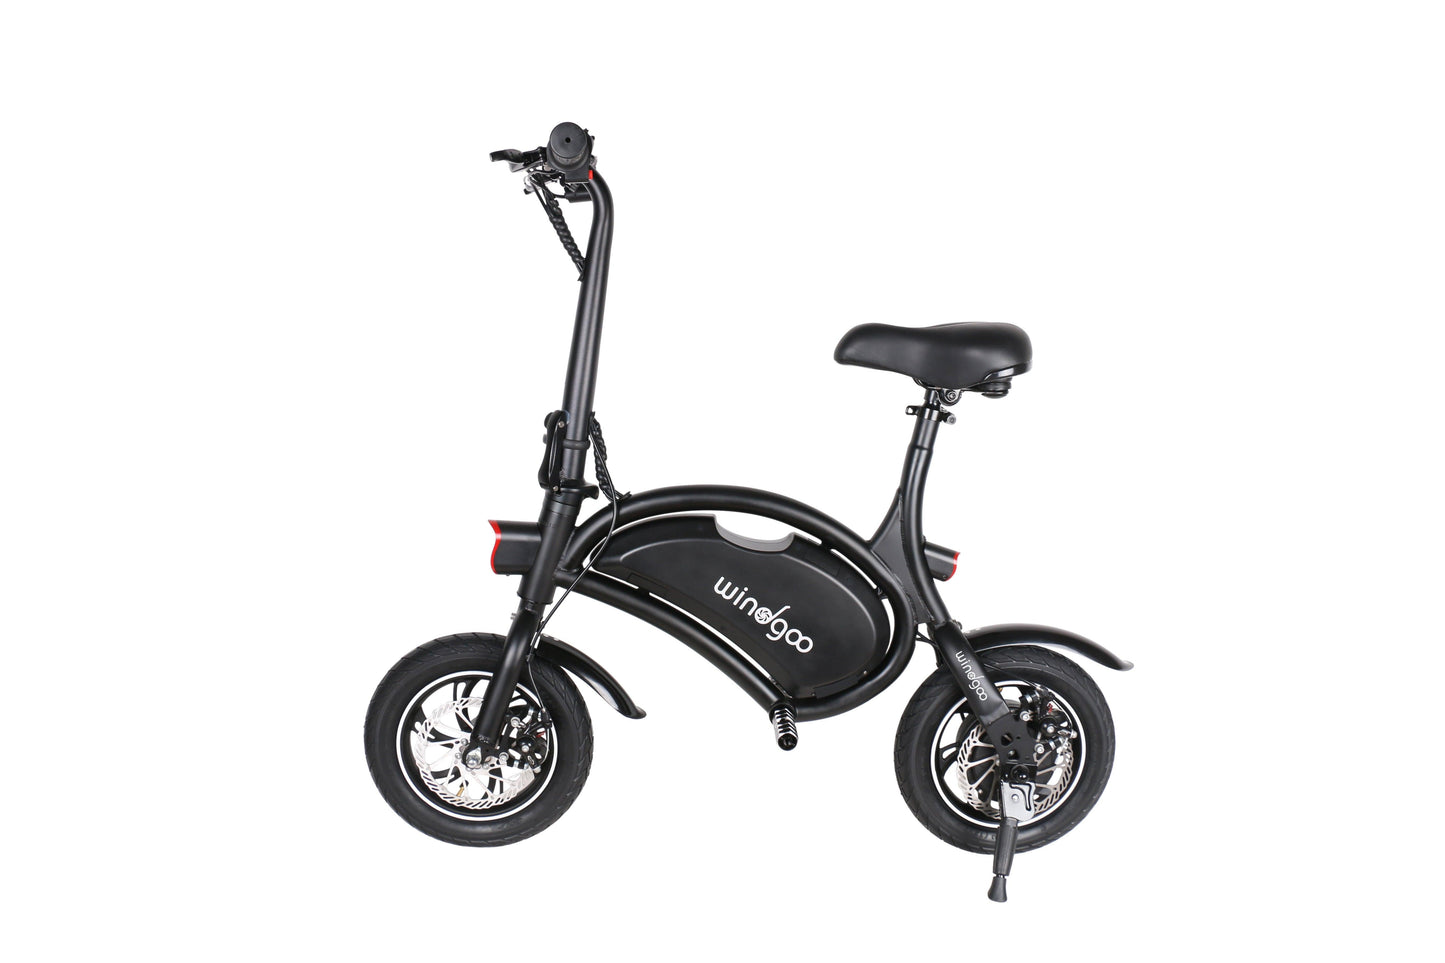 Windgoo B3 Electric Bike For Short Commutes - Pogo cycles UK -cycle to work scheme available